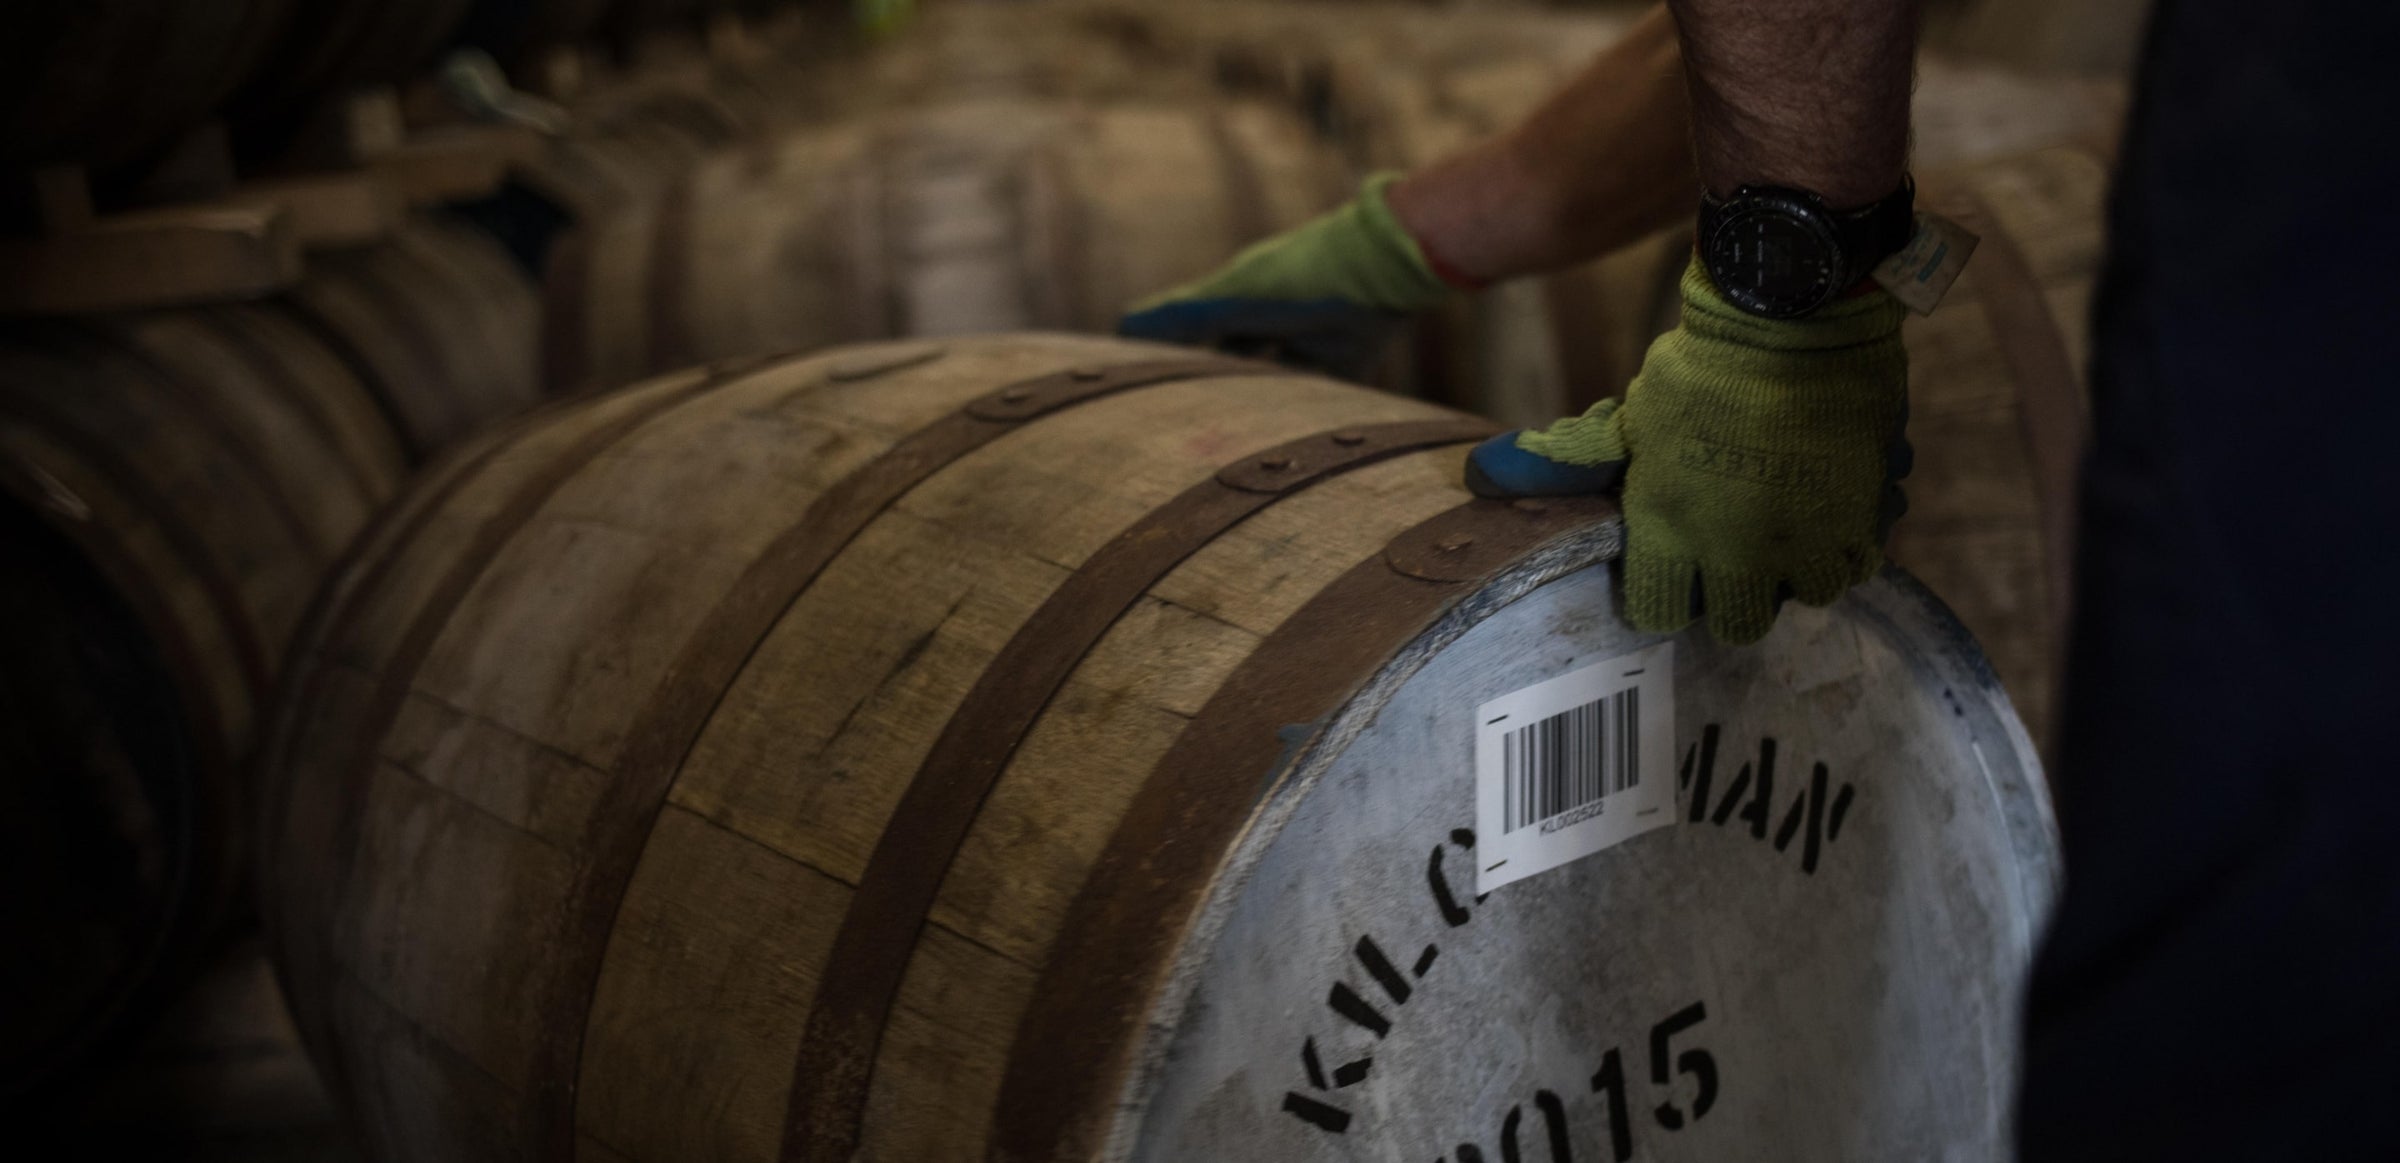 Person wearing gloves moving a barrel of whisky with a bar code covering some letters